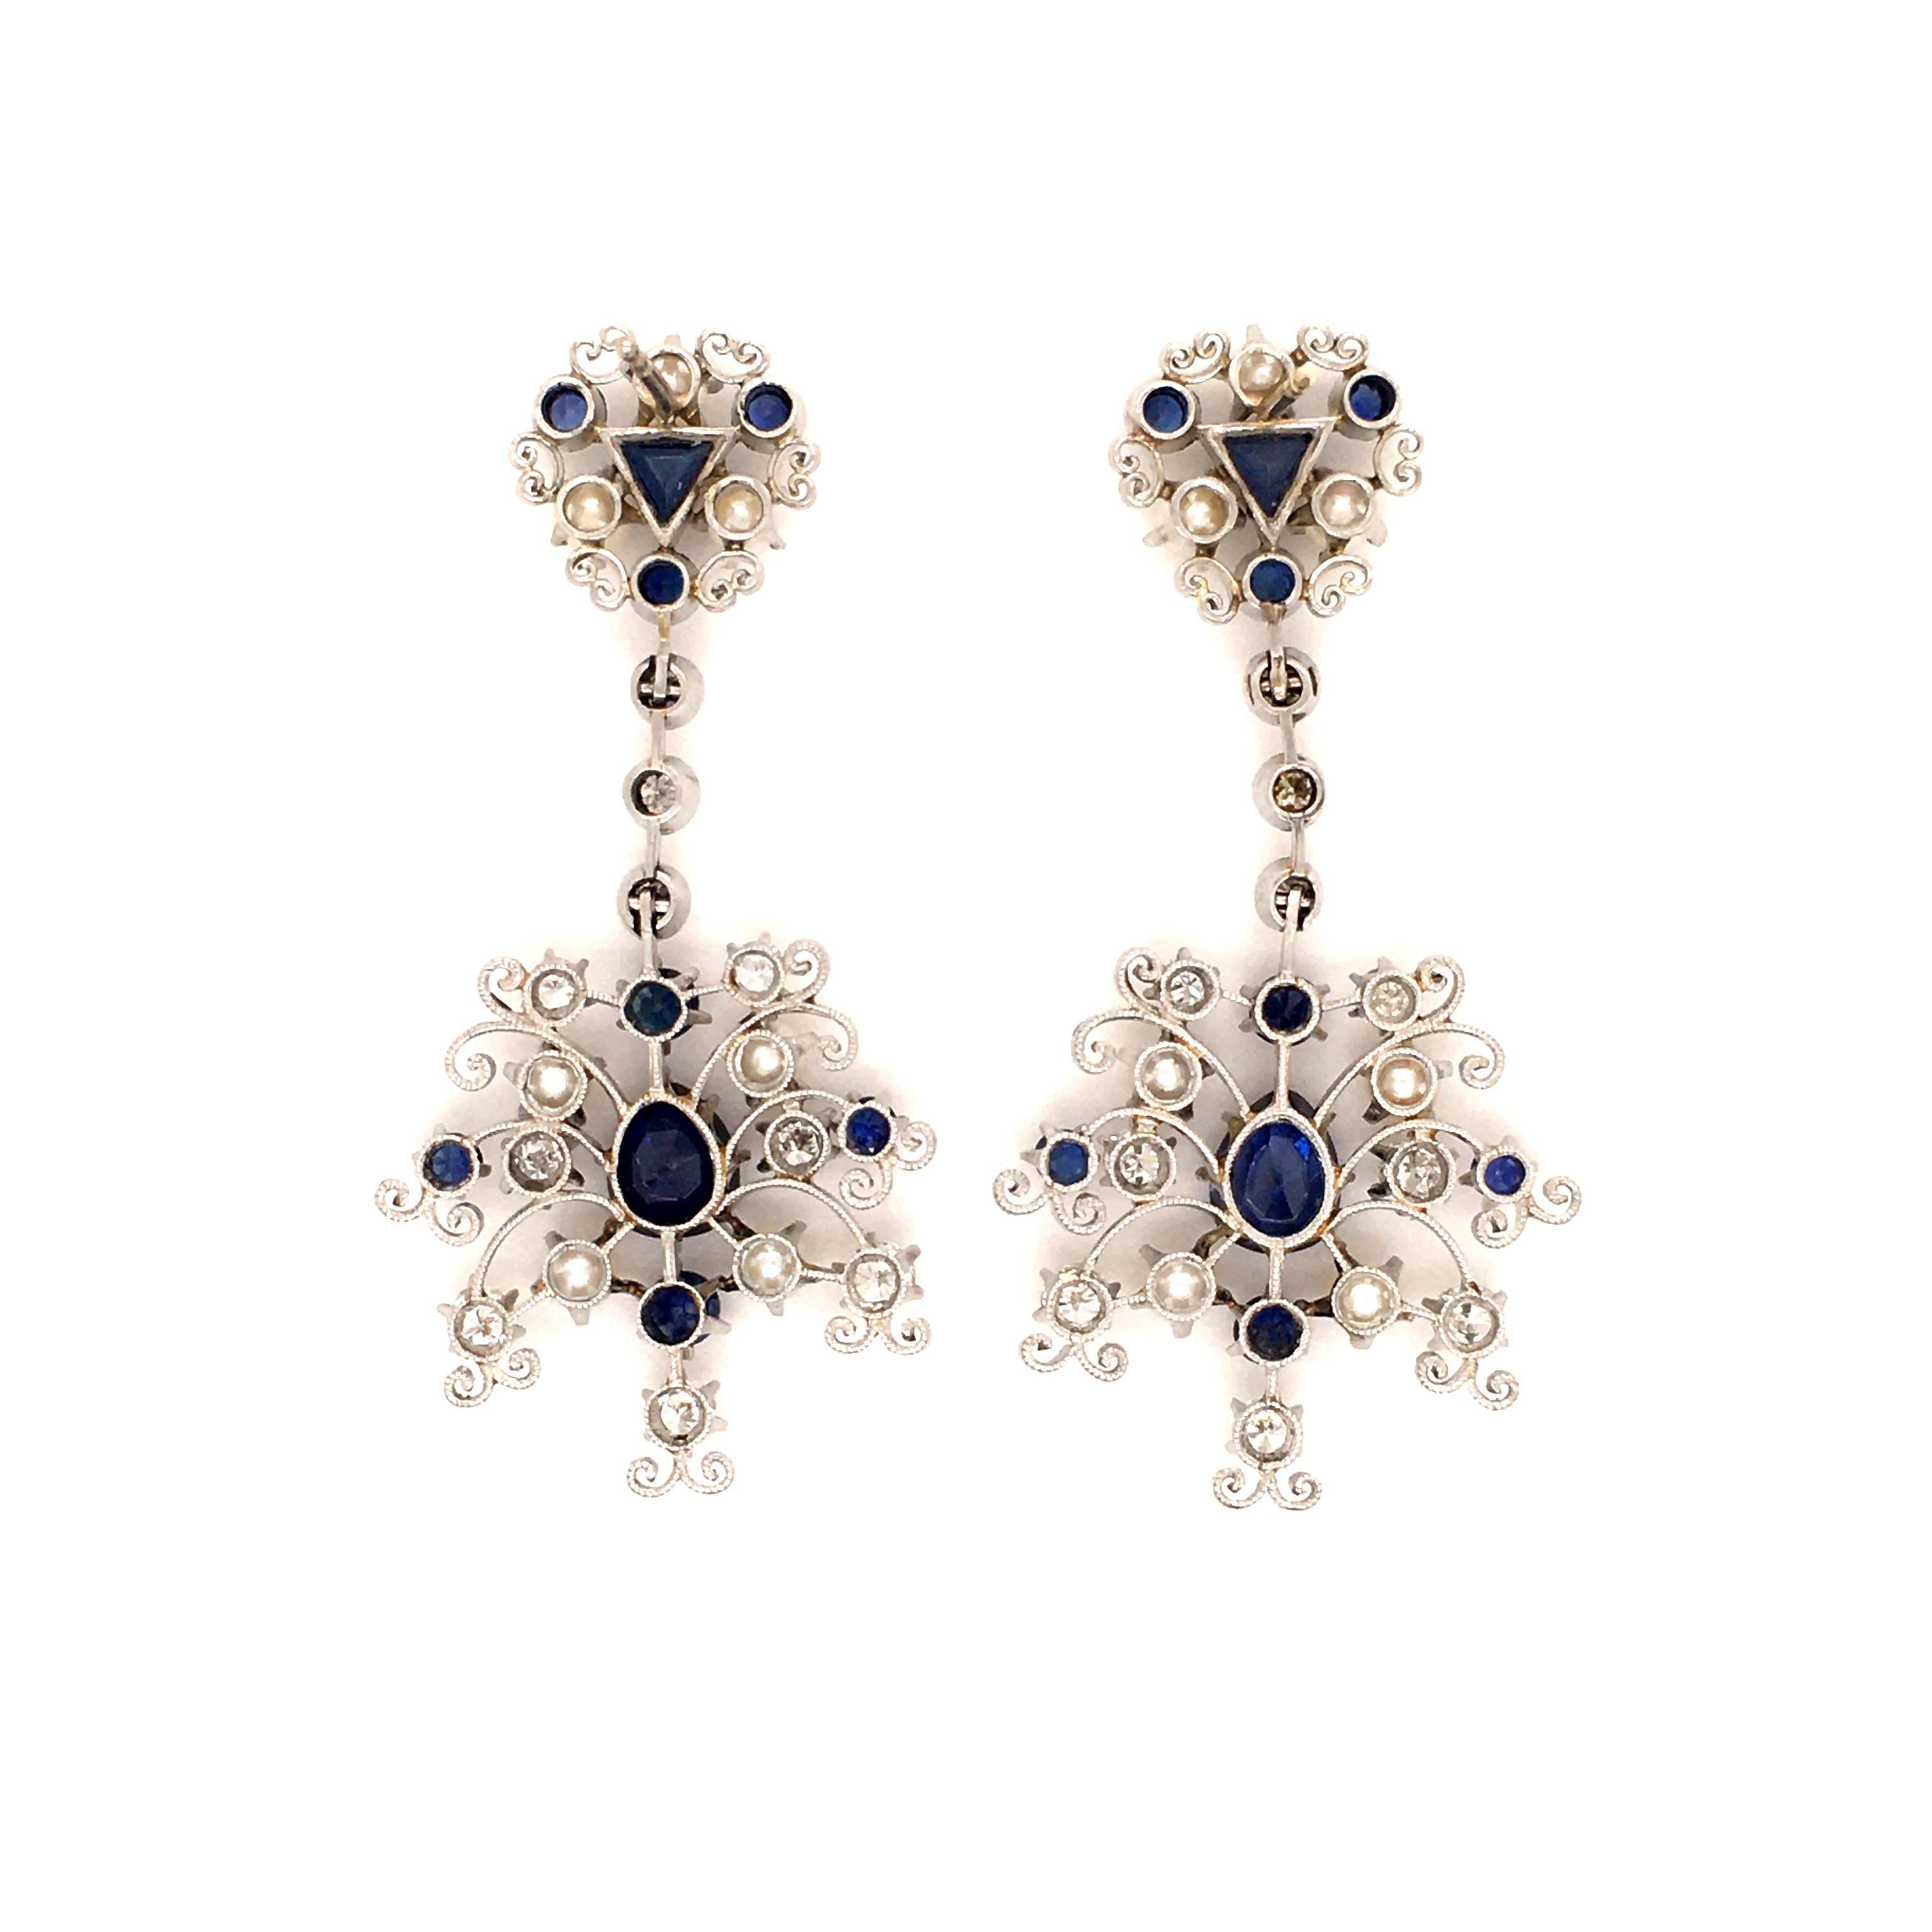 These snowflake like ear studs in platinum 950 are set with two pear shaped sapphires in the centre, total weight 2.50 carats, and 16 round and triangle cut sapphires, total weight 1.20 carats. In addition, there are also 14 round cultured pearls